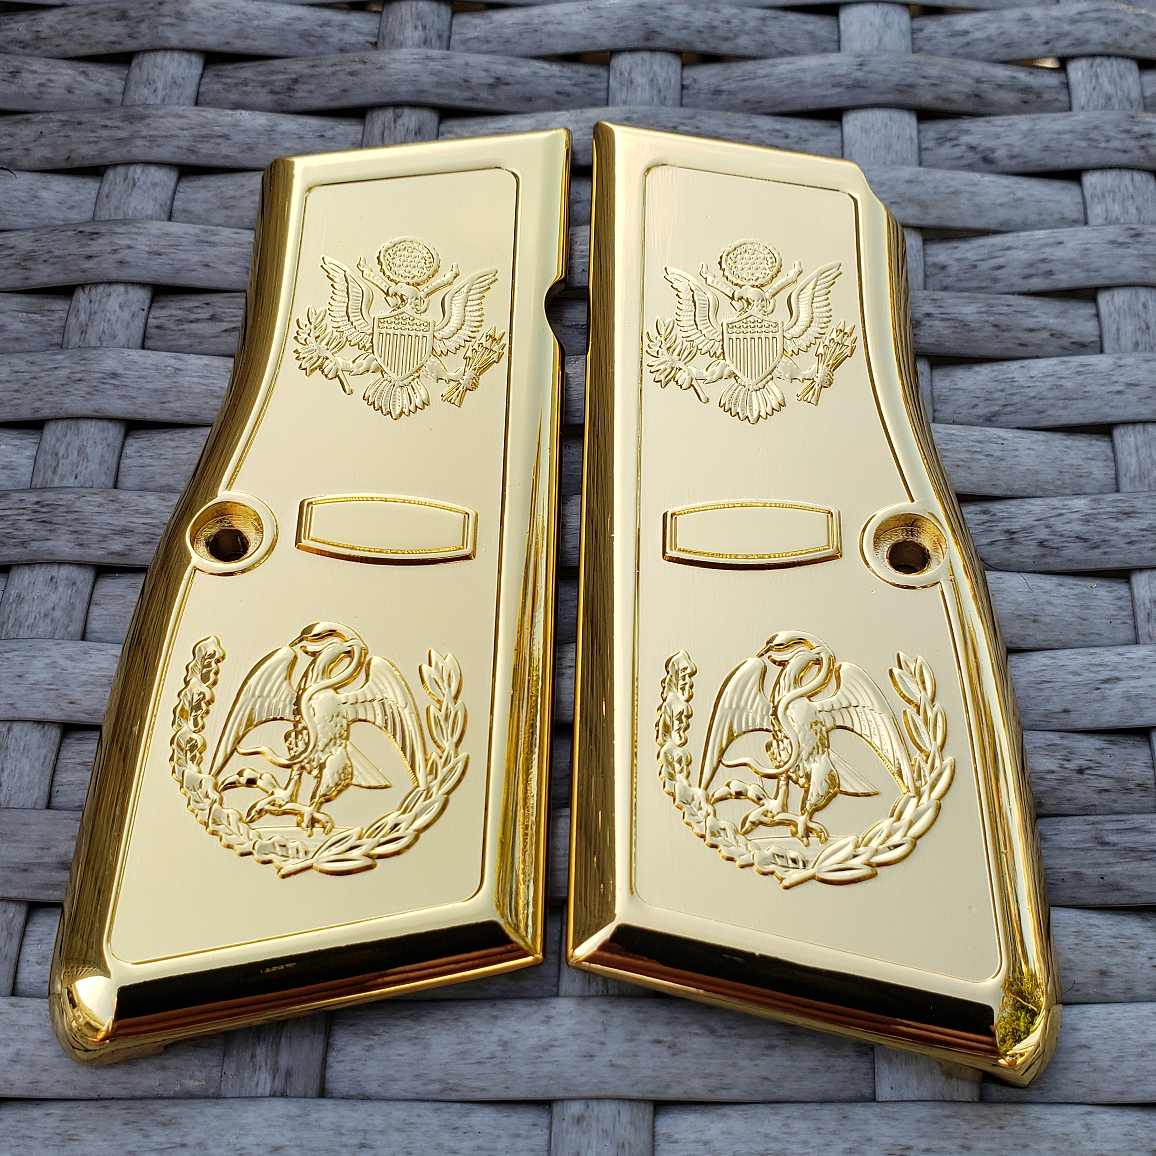 Browning Hi power Engraved Gun Grips Cacha Eagle Full gold Plated